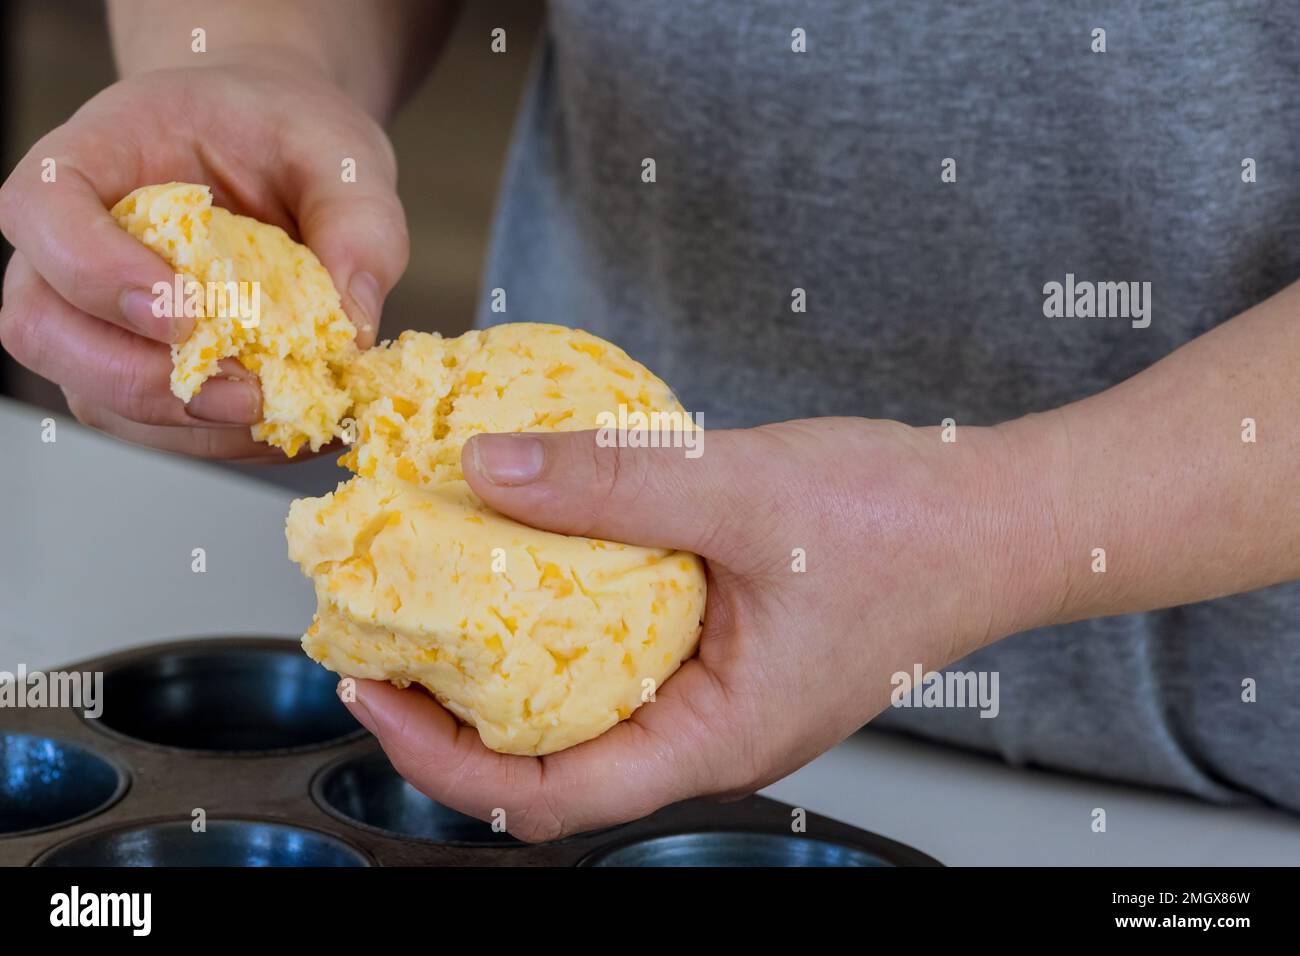 There is traditional Brazilian snack made with cheese buns called chipa, which are traditionally prepared at home then baked. Stock Photo